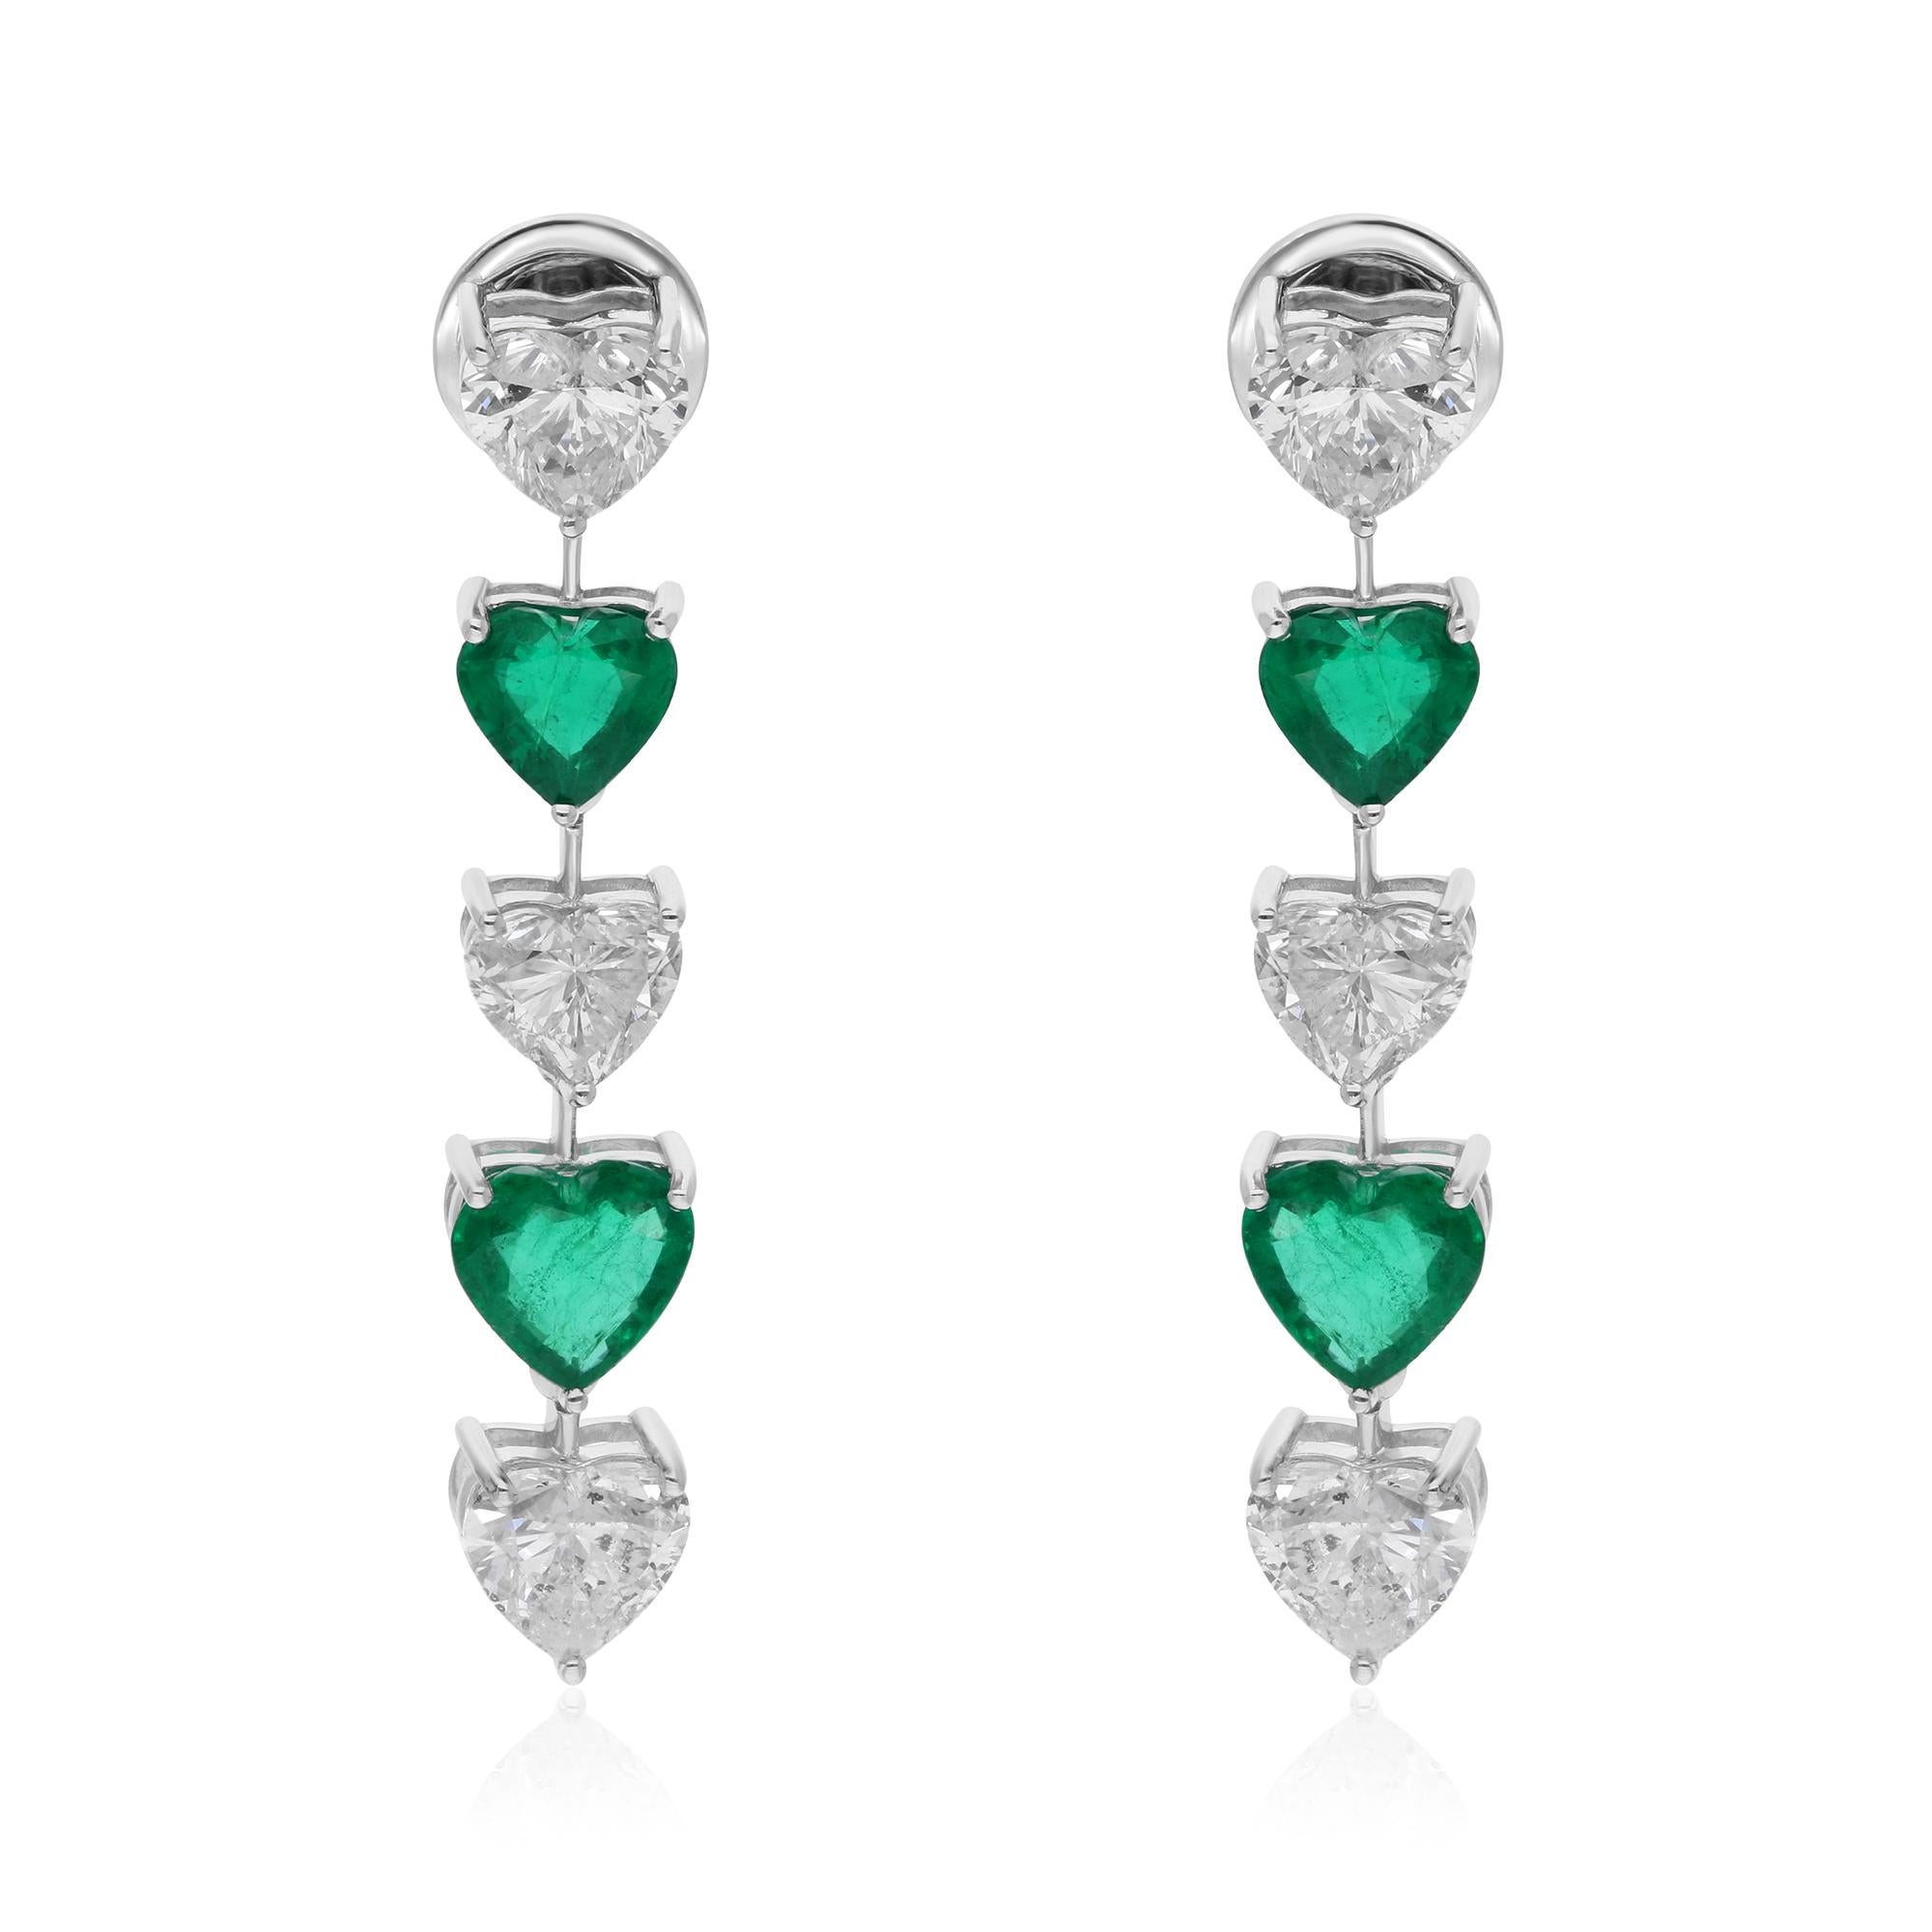 Crafted with precision and care, these dangle earrings are a true work of art, designed to be cherished for a lifetime. The 18 karat white gold setting provides a luxurious backdrop for the gemstones and diamonds, enhancing their radiance with its